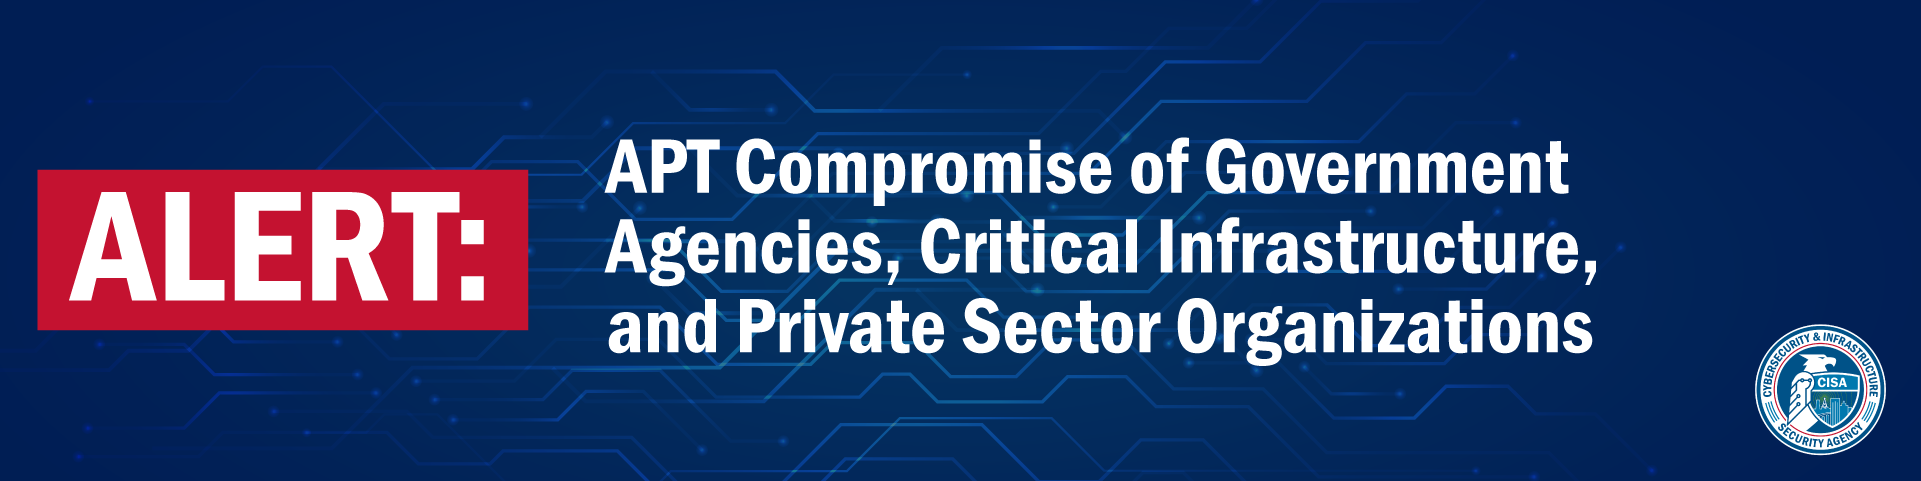 Alert APT Compromise of Government Agencies, Critical Infrastructure, and Private Sector Organizations